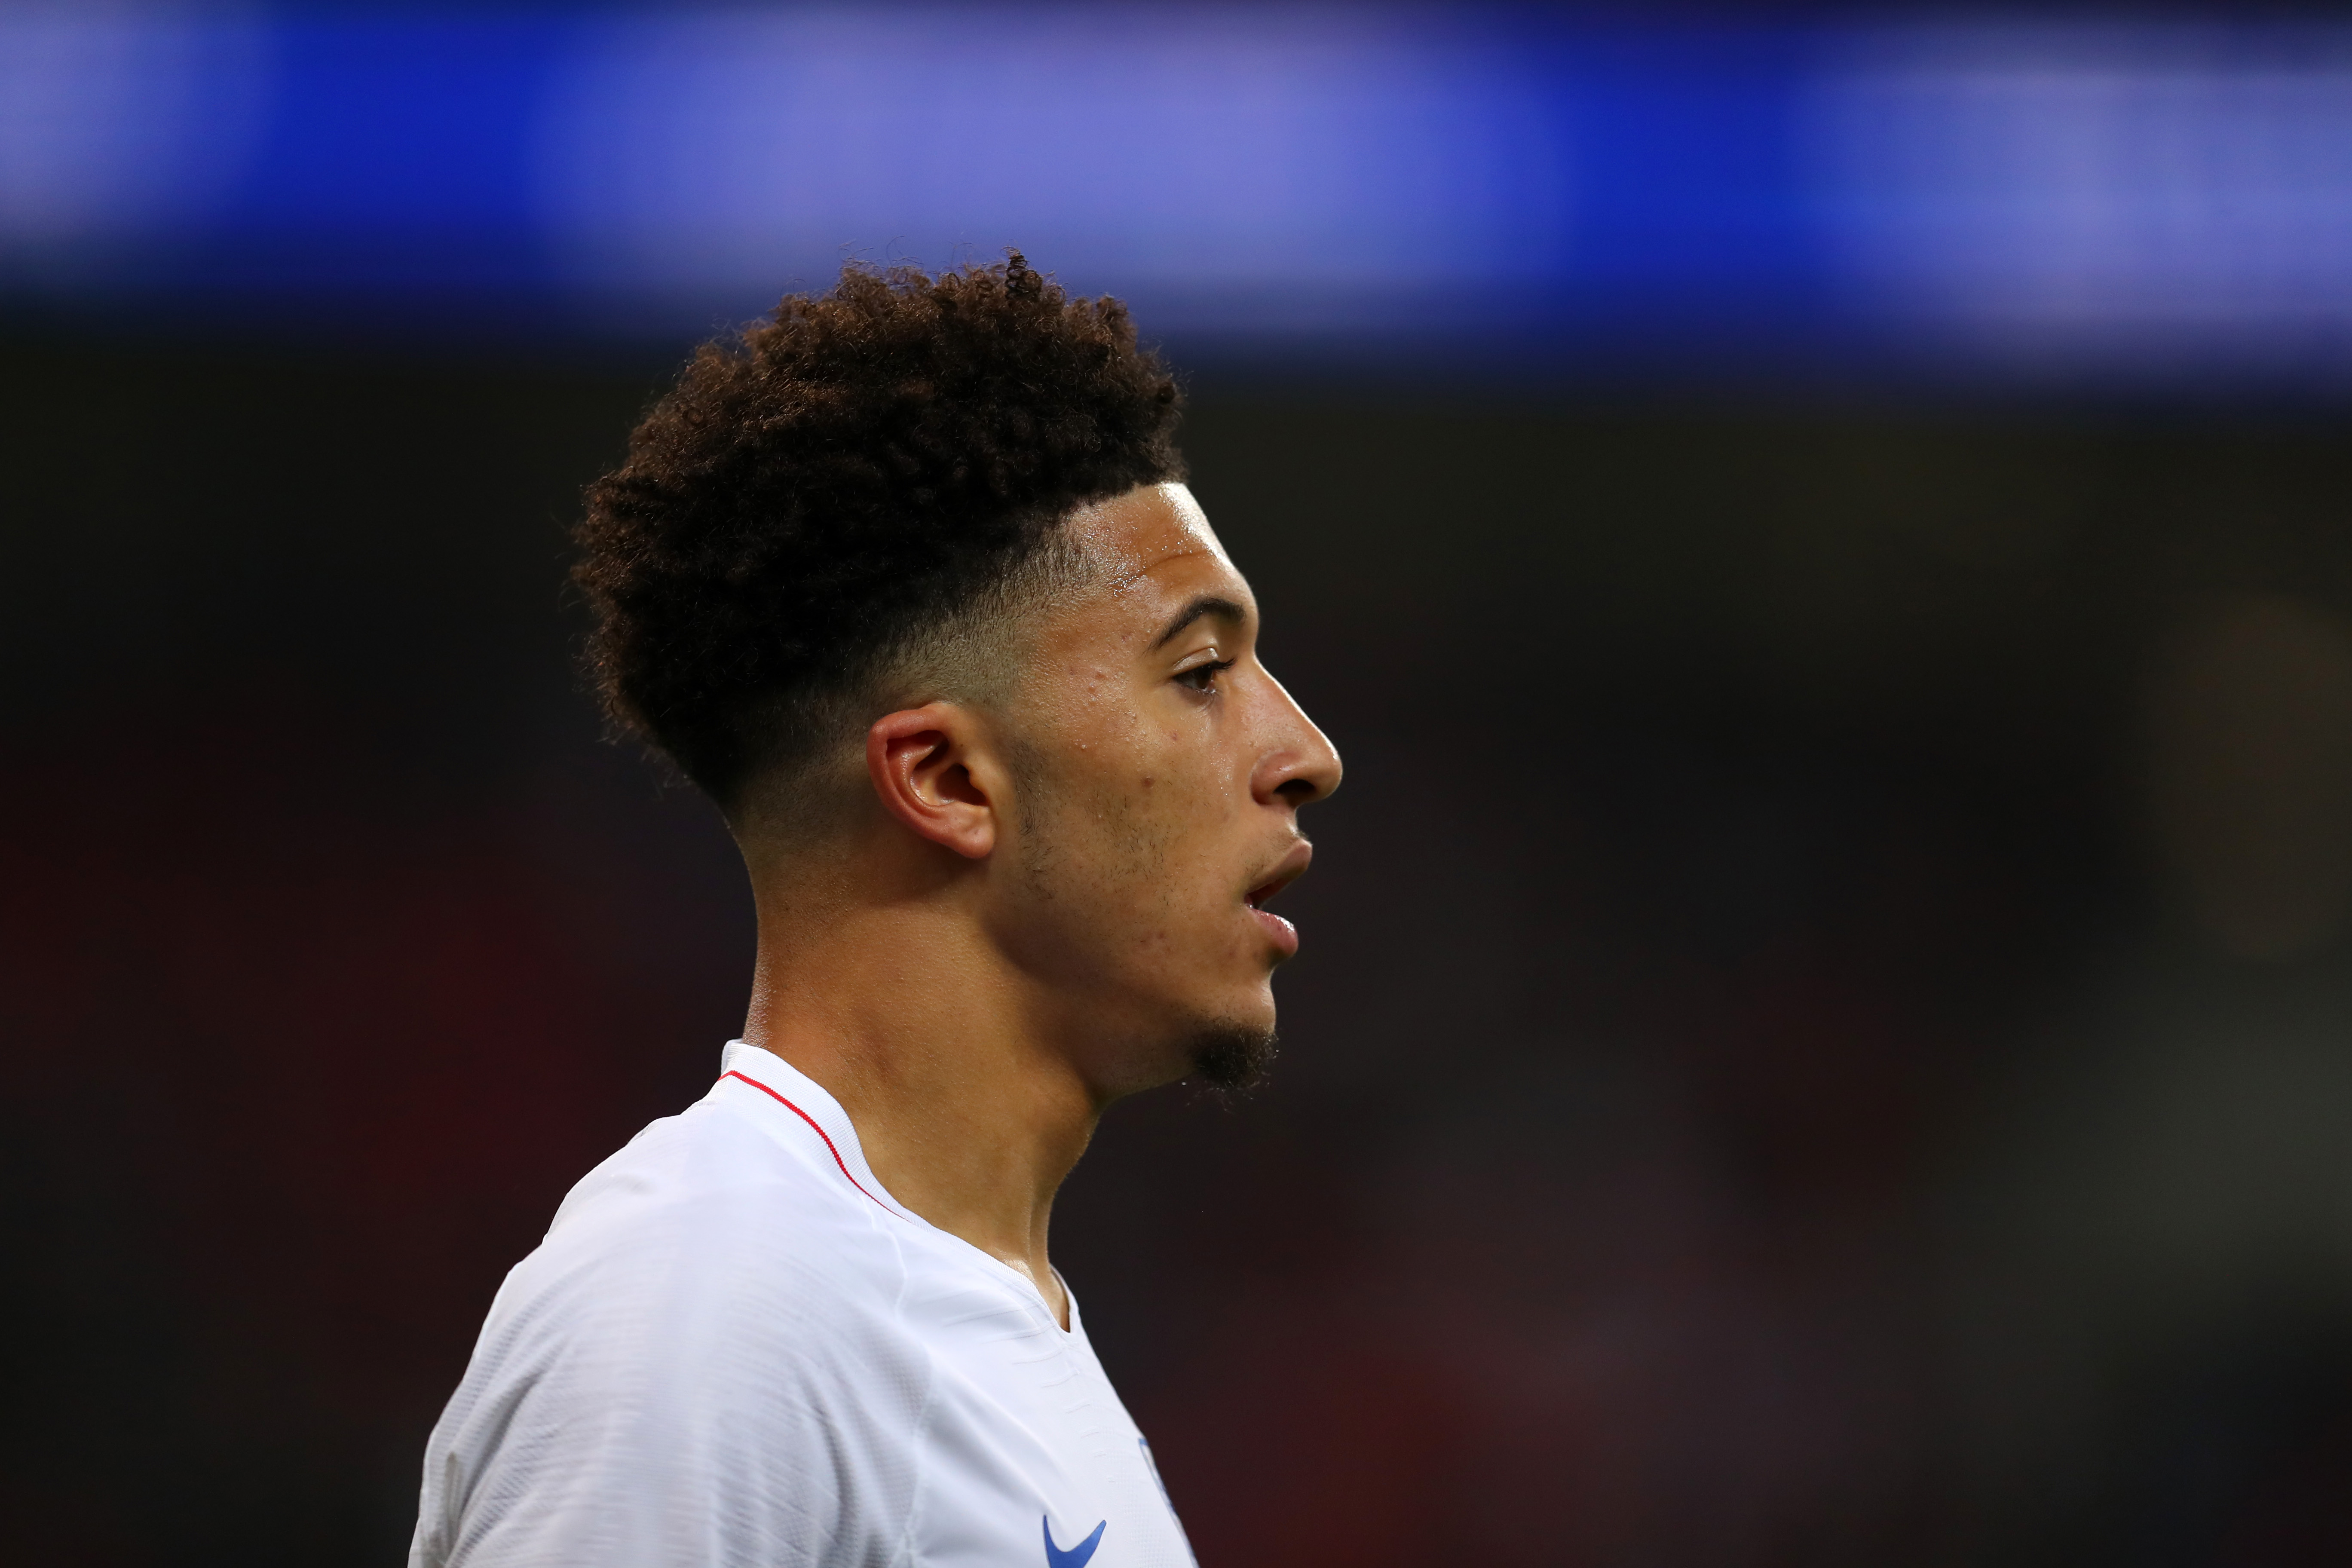 LONDON, ENGLAND - NOVEMBER 15: Jadon Sancho of England during the International Friendly match between England and United States at Wembley Stadium on November 15, 2018 in London, United Kingdom. (Photo by Catherine Ivill/Getty Images)